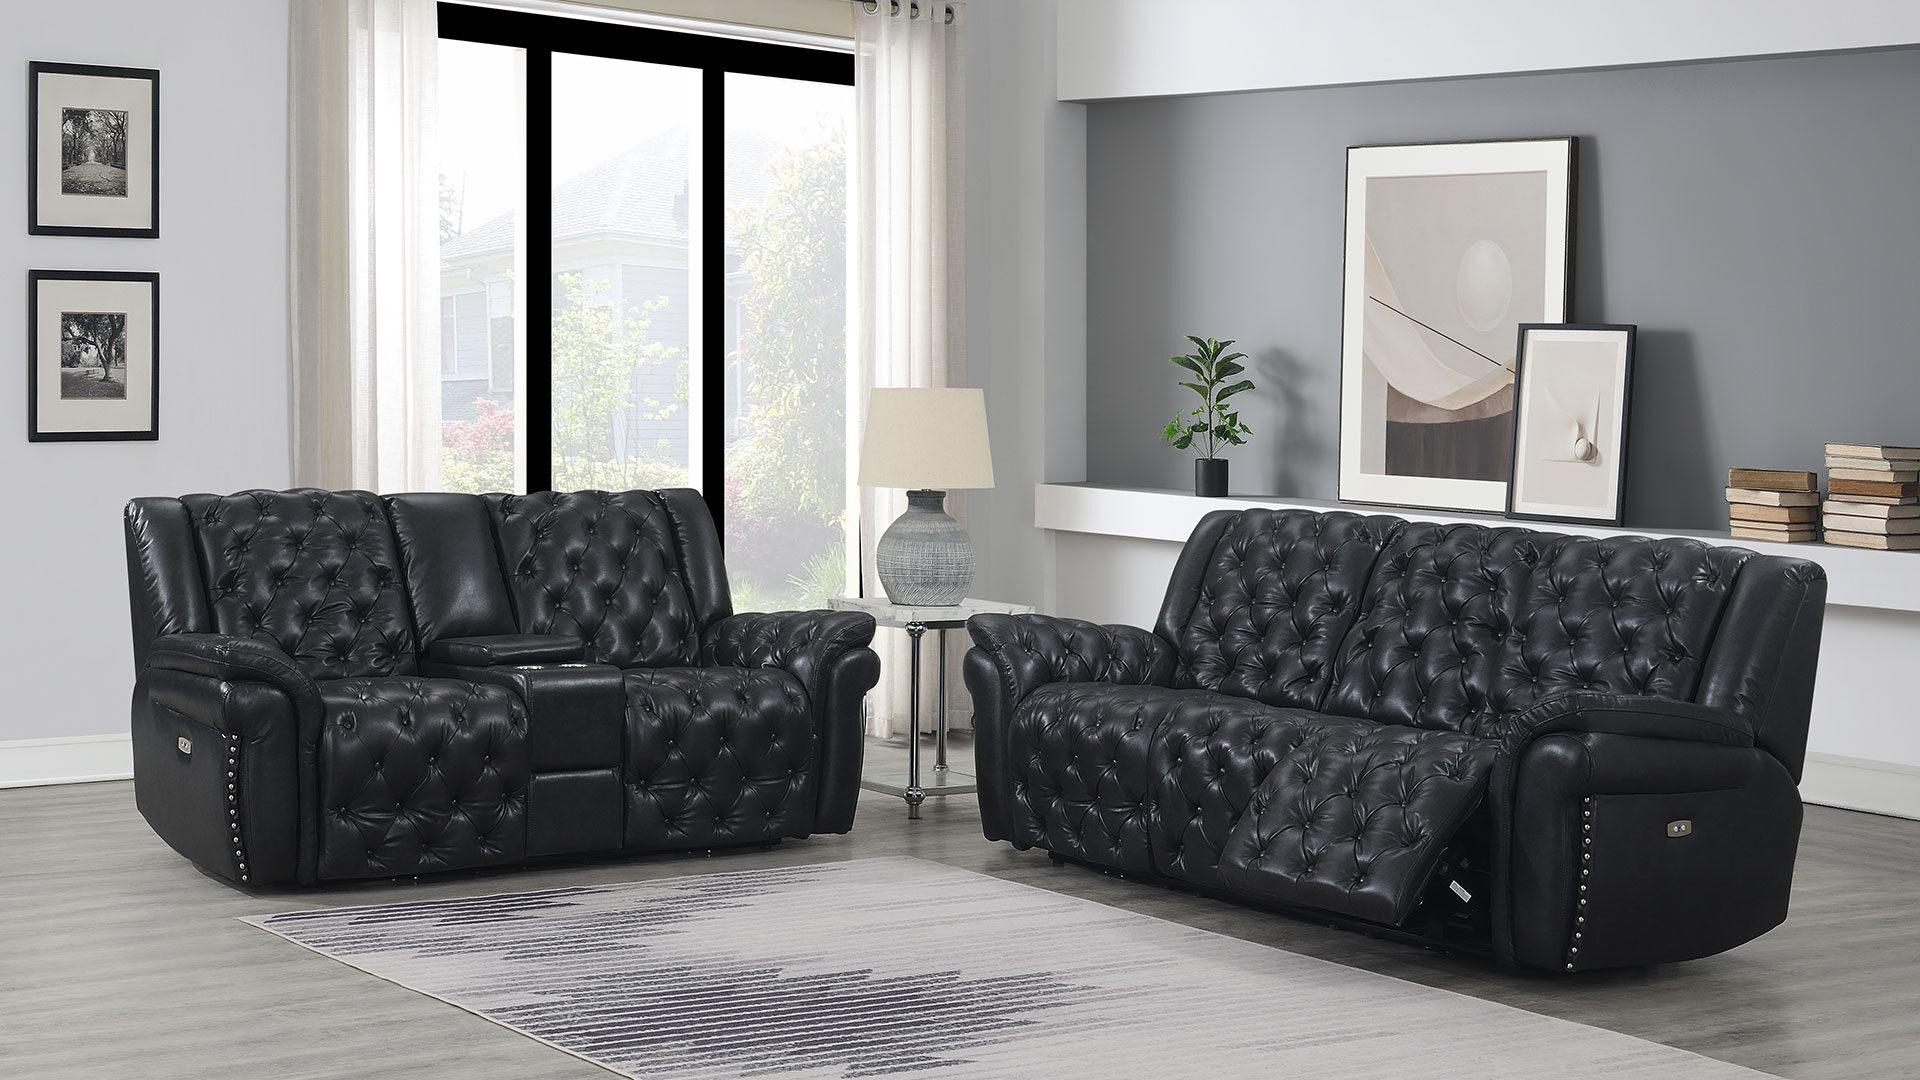 

    
Charcoal Gray Leather Air Power Reclining Sofa Set w/ Console 2Pcs EVELYN Global USA
